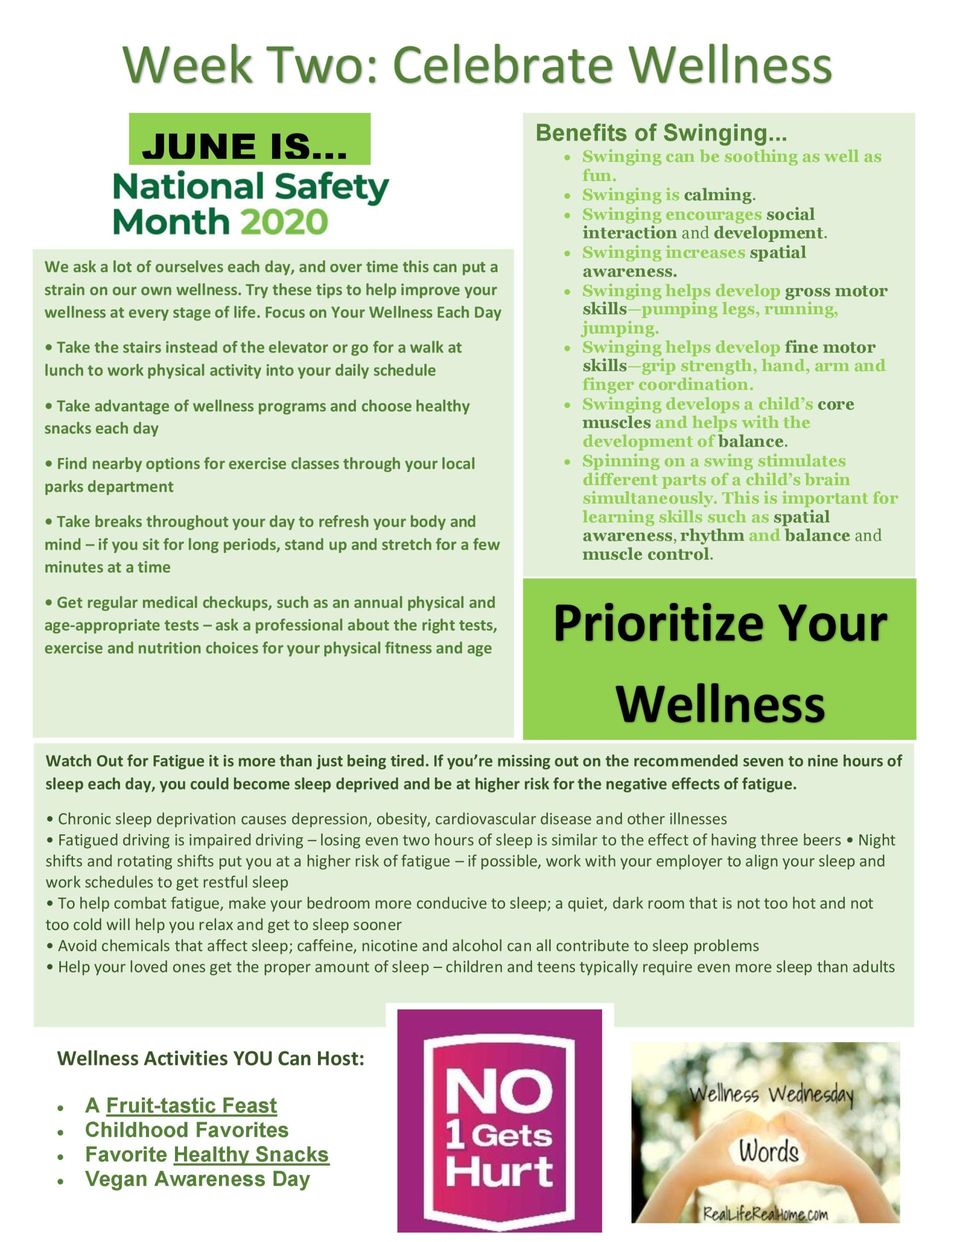 June is National Safety Month: Week Two (Wellness) graphic.